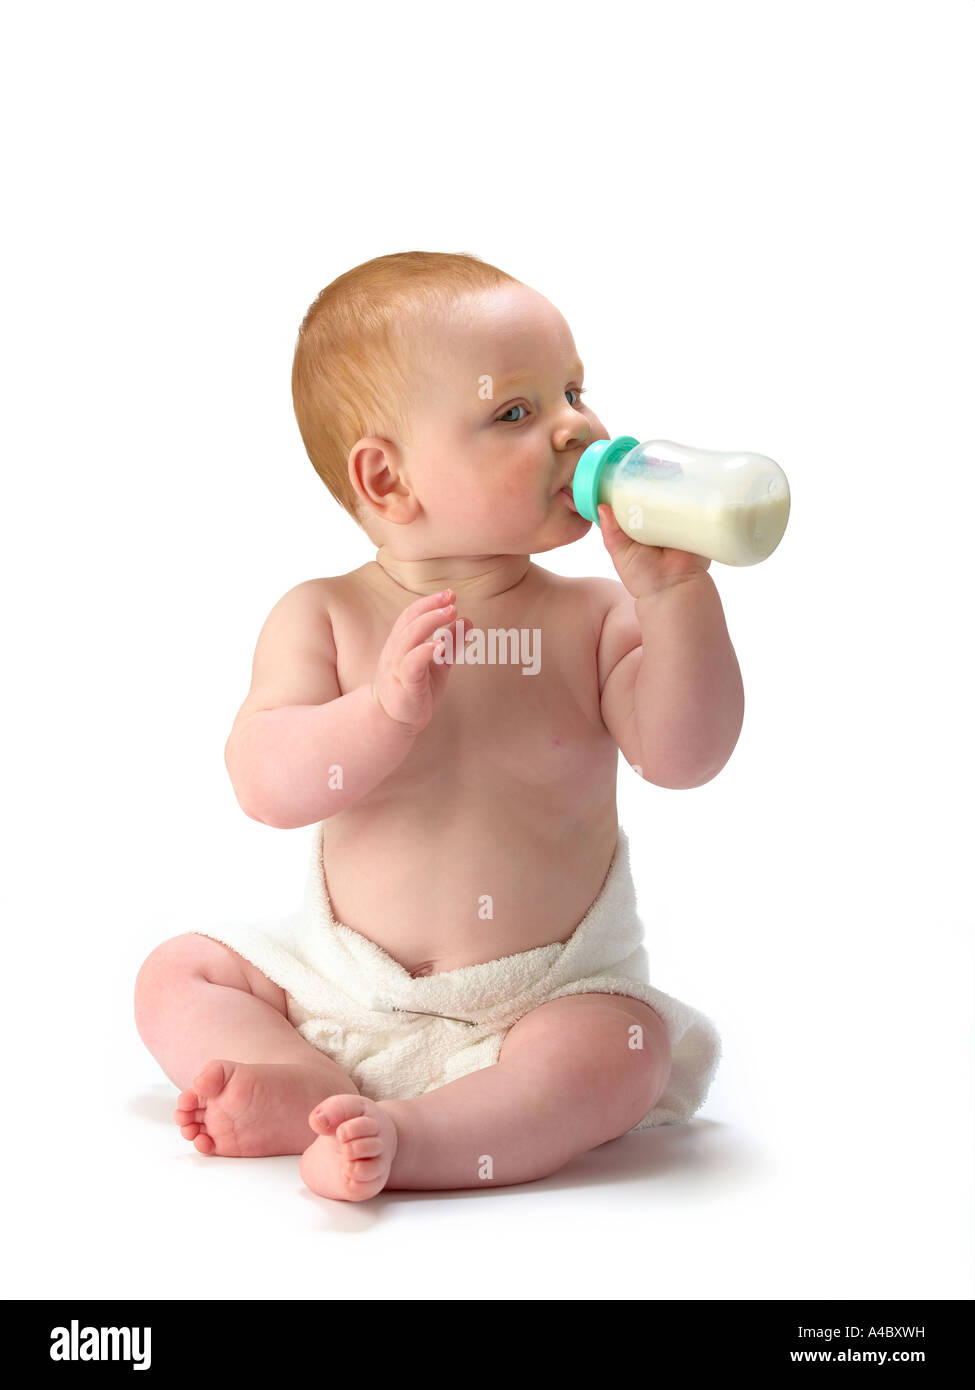 6 month old baby Stock Photo